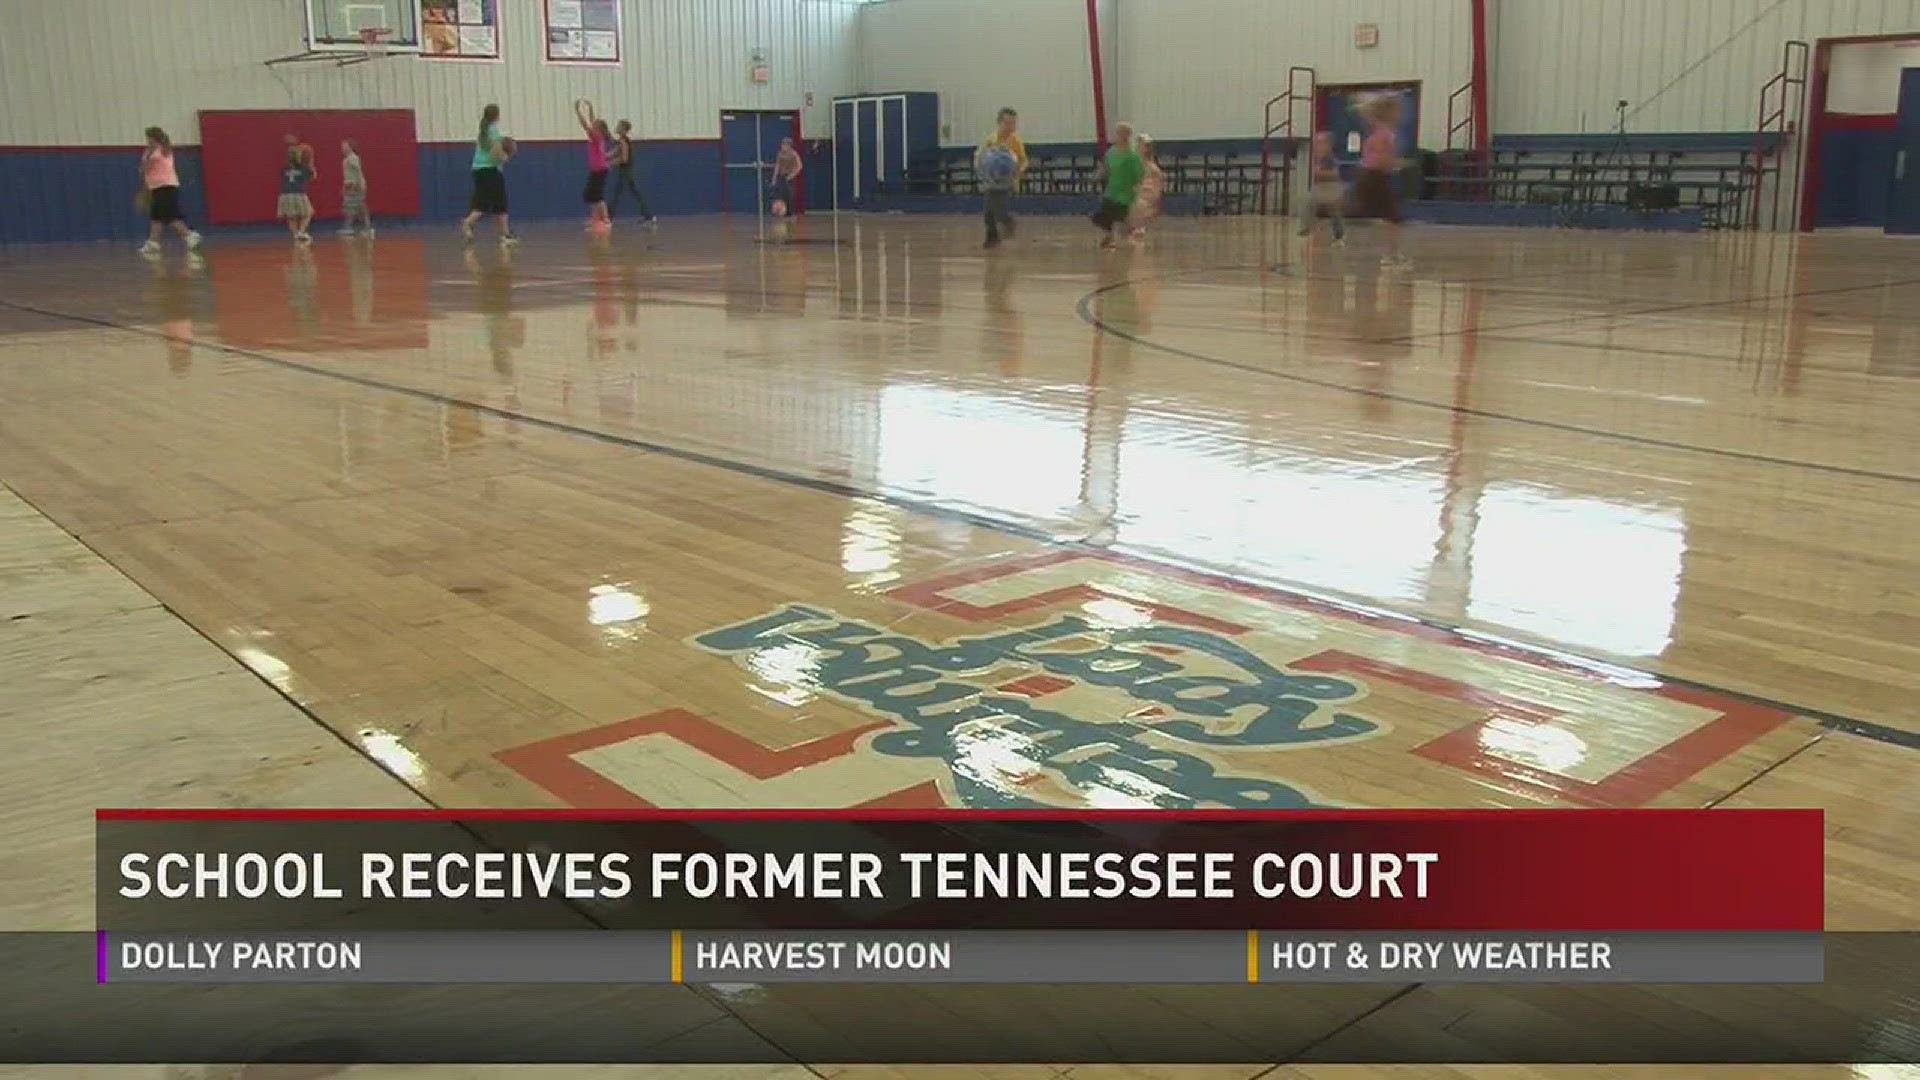 School receives former Tennessee court